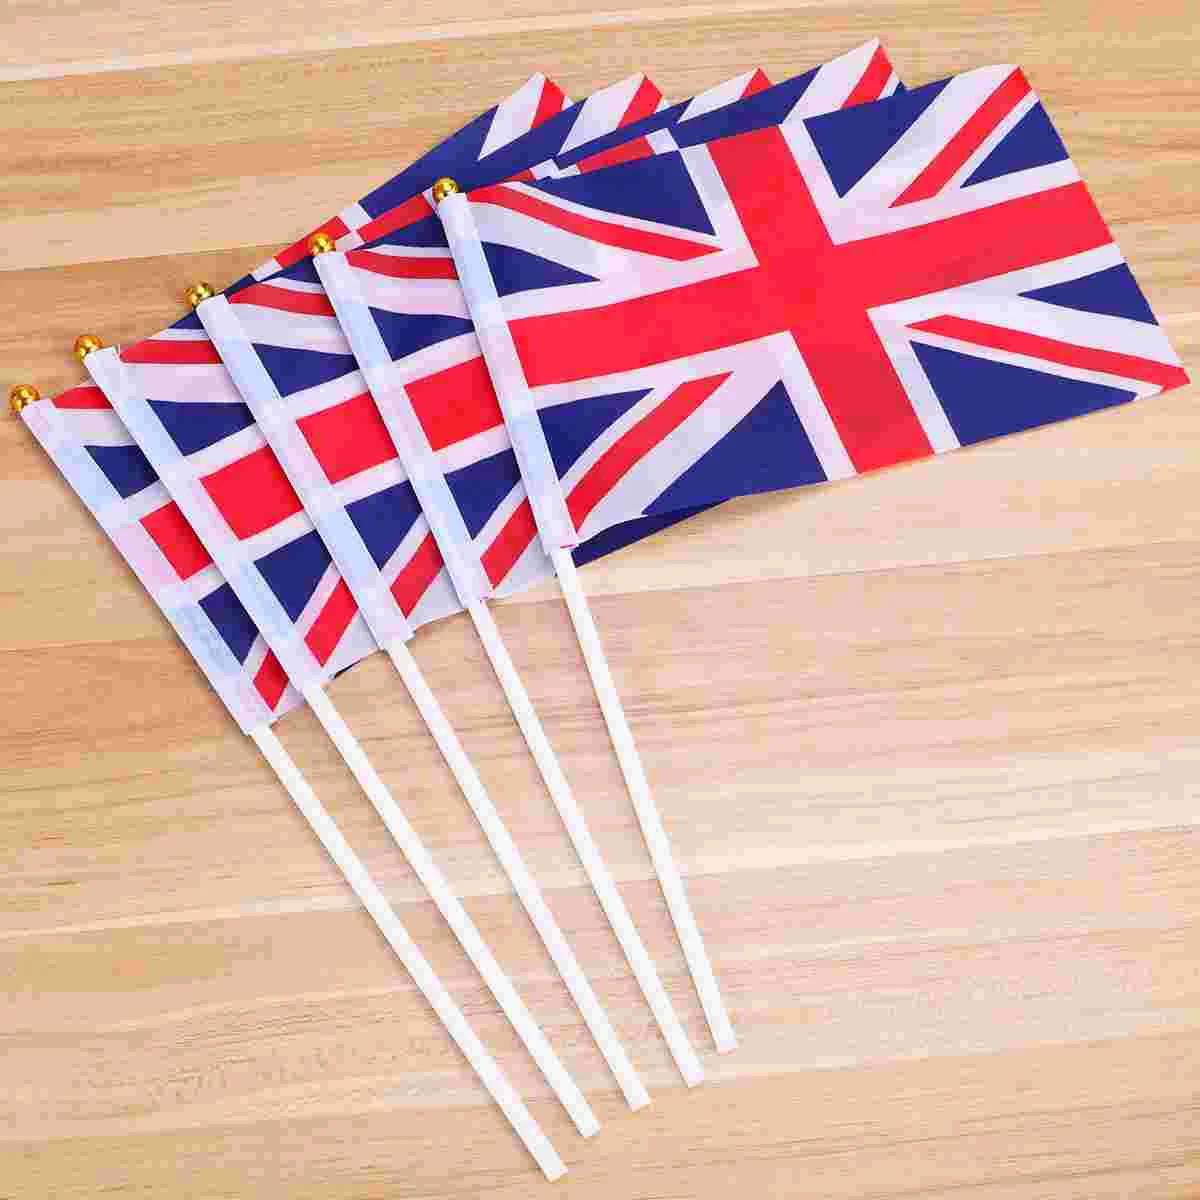 

100Pcs Union Jack Hand Held Flag UK Royal Great Britain Hand Waving Flag for International, Festival Party, Sports Clubs